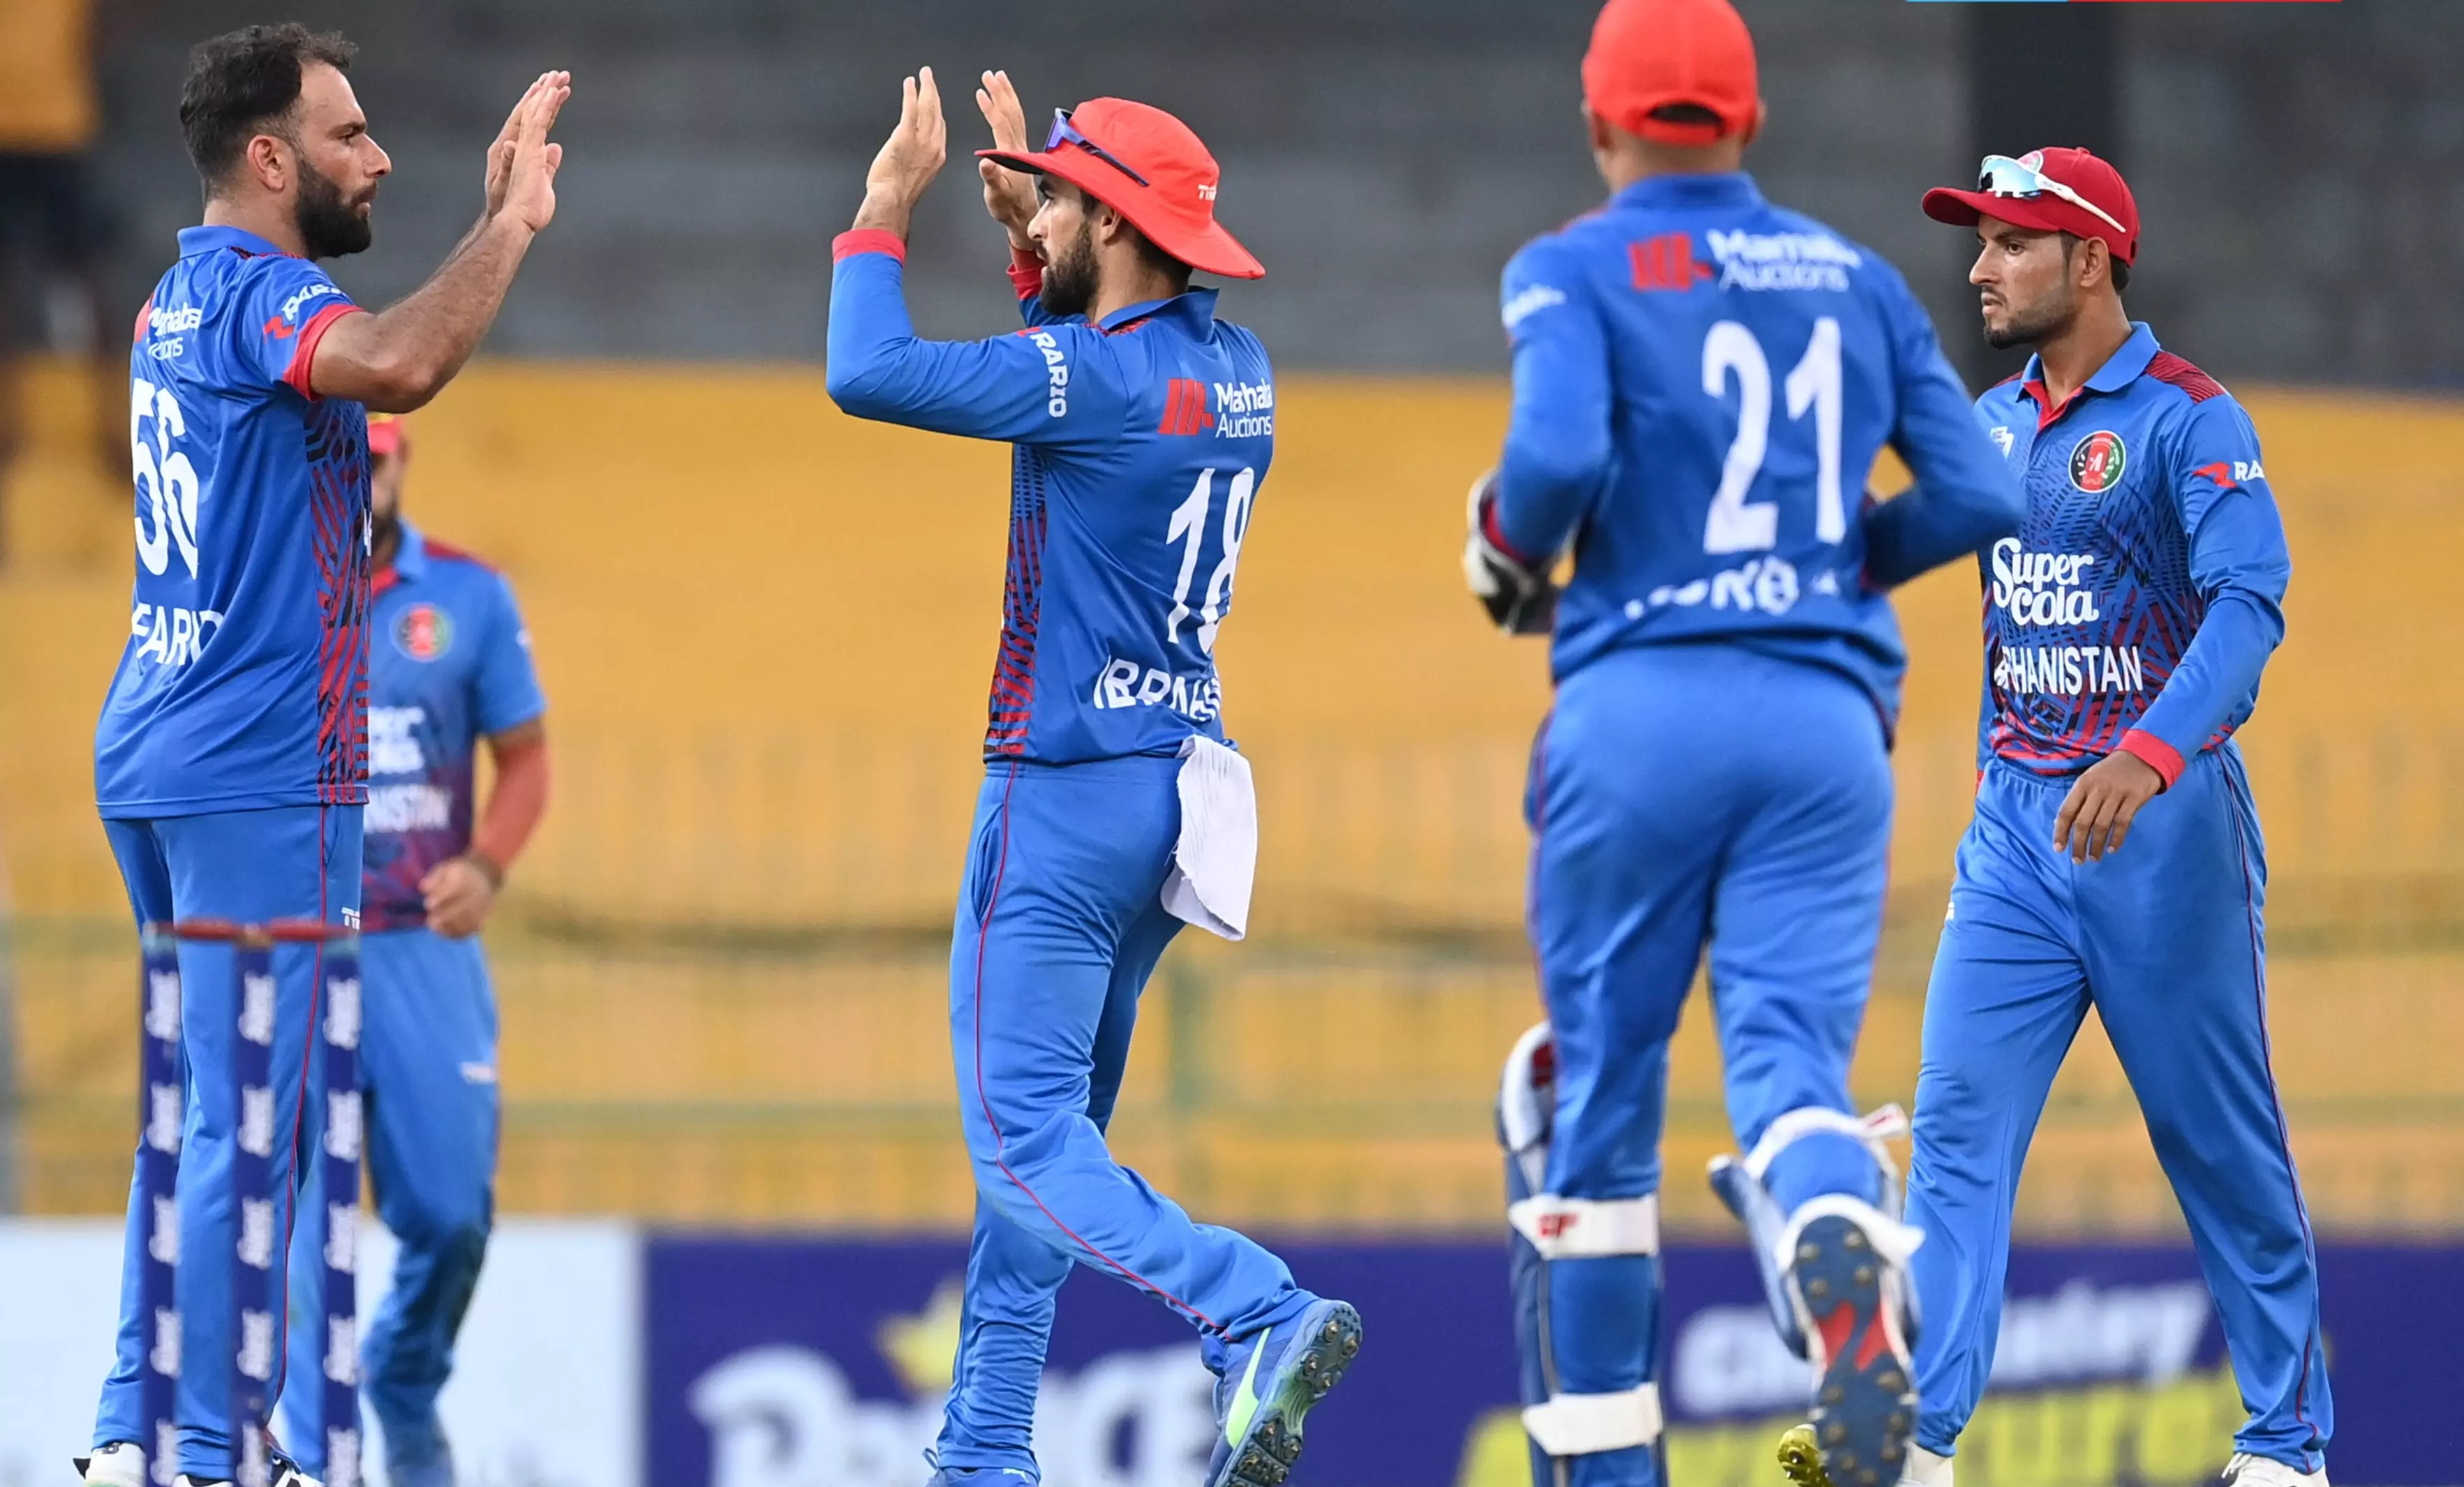 Asia Cup opens doors, but minnows need more matches to put lessons into practice